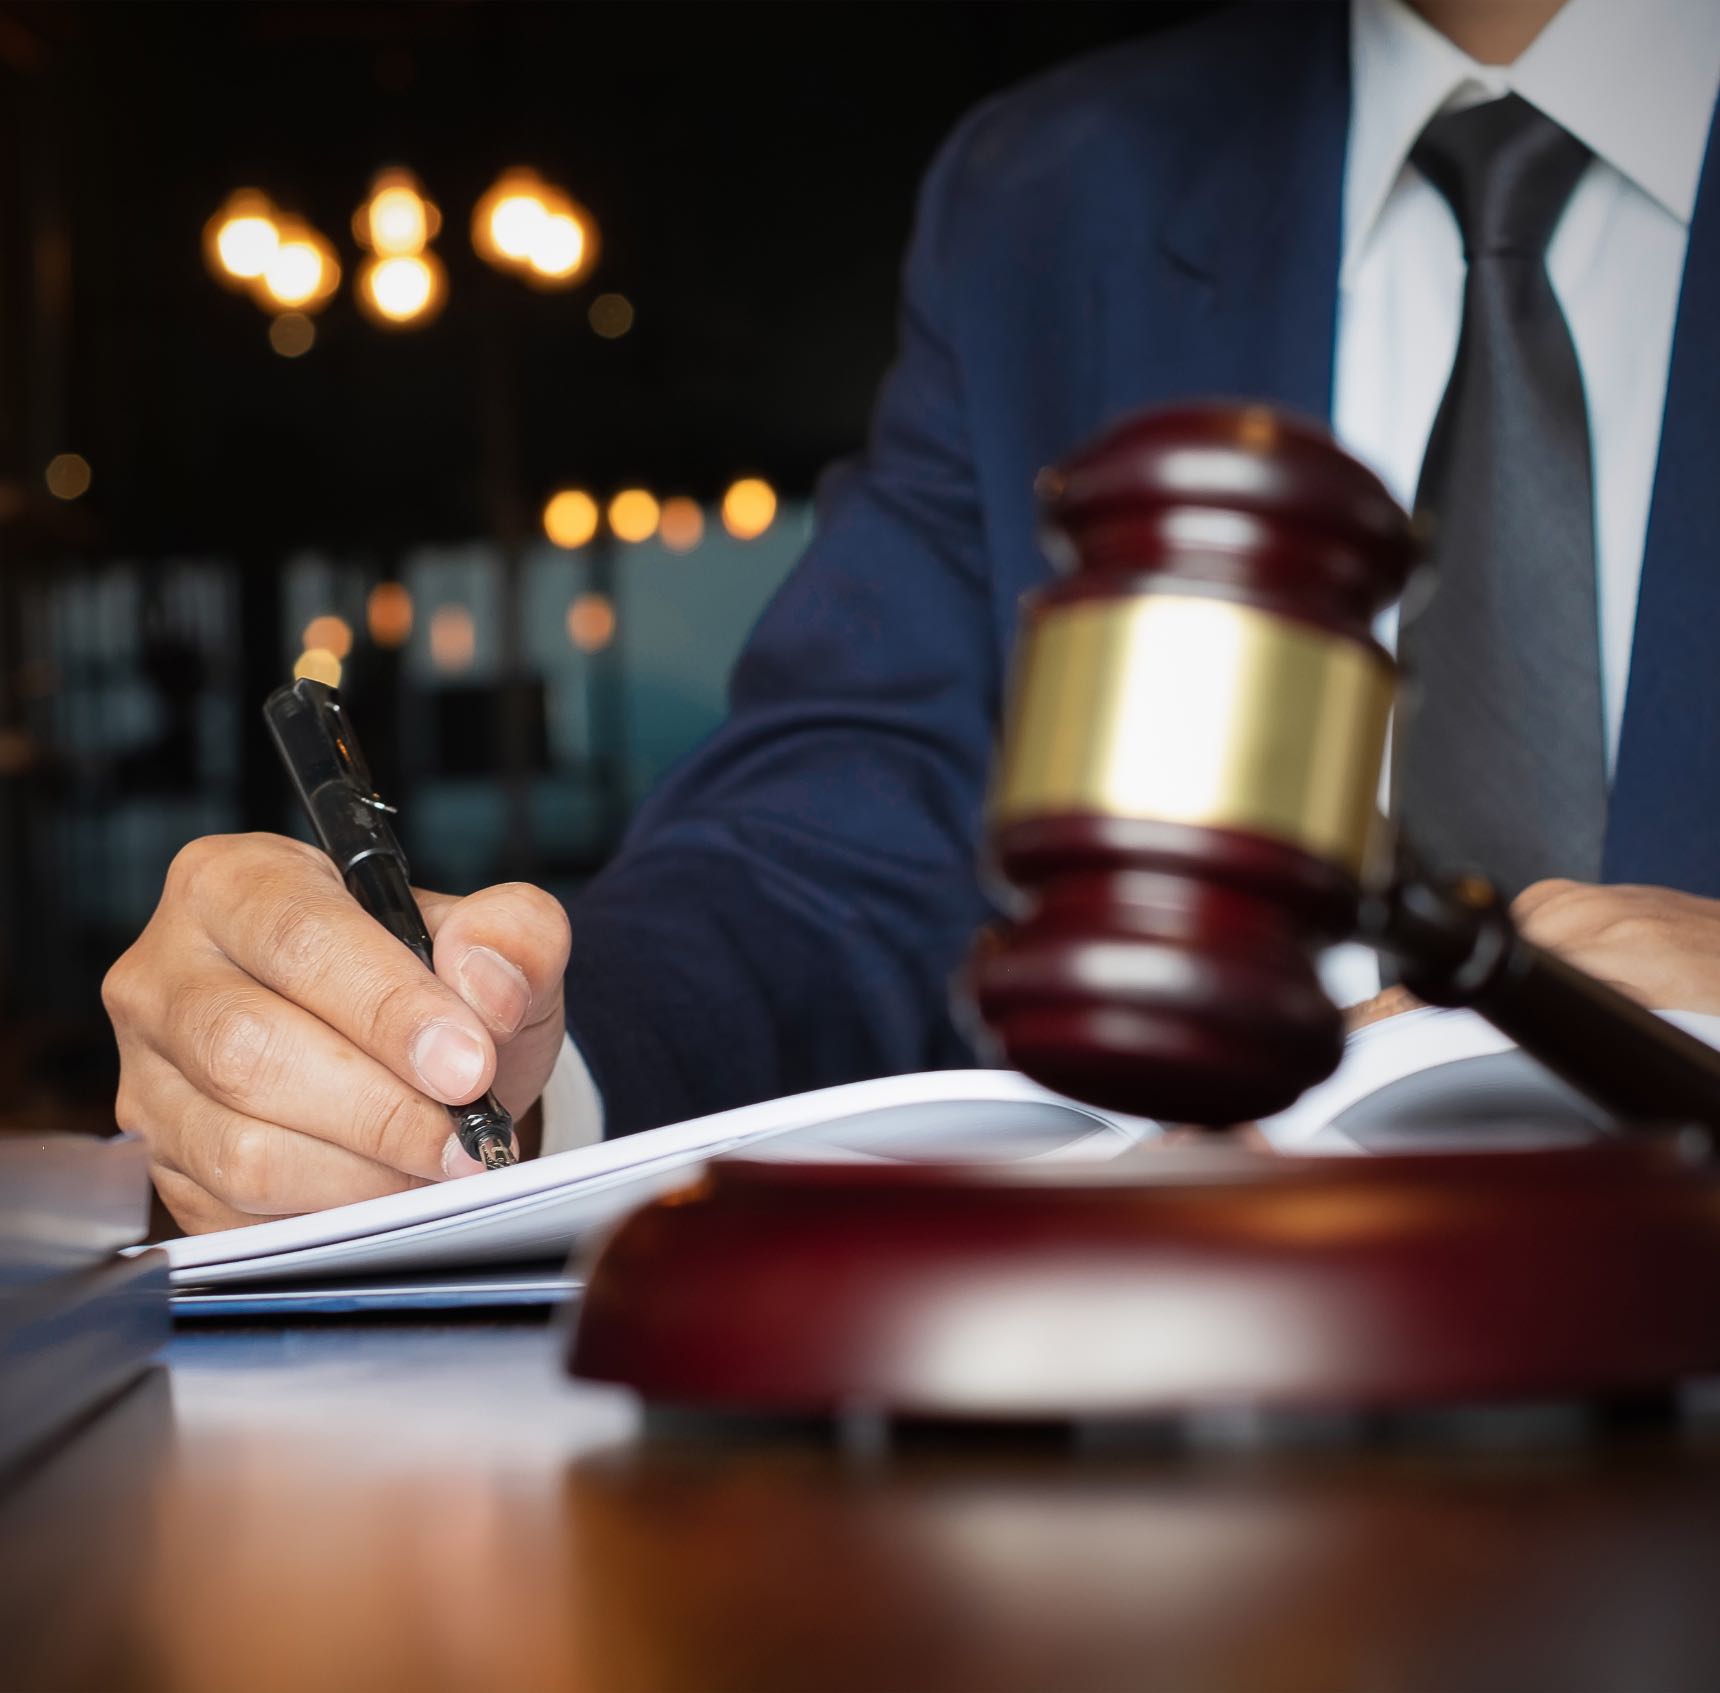 It’s essential that you choose an experienced and trustworthy attorney who is ready to fight for your rights--contact Branson West Law today!